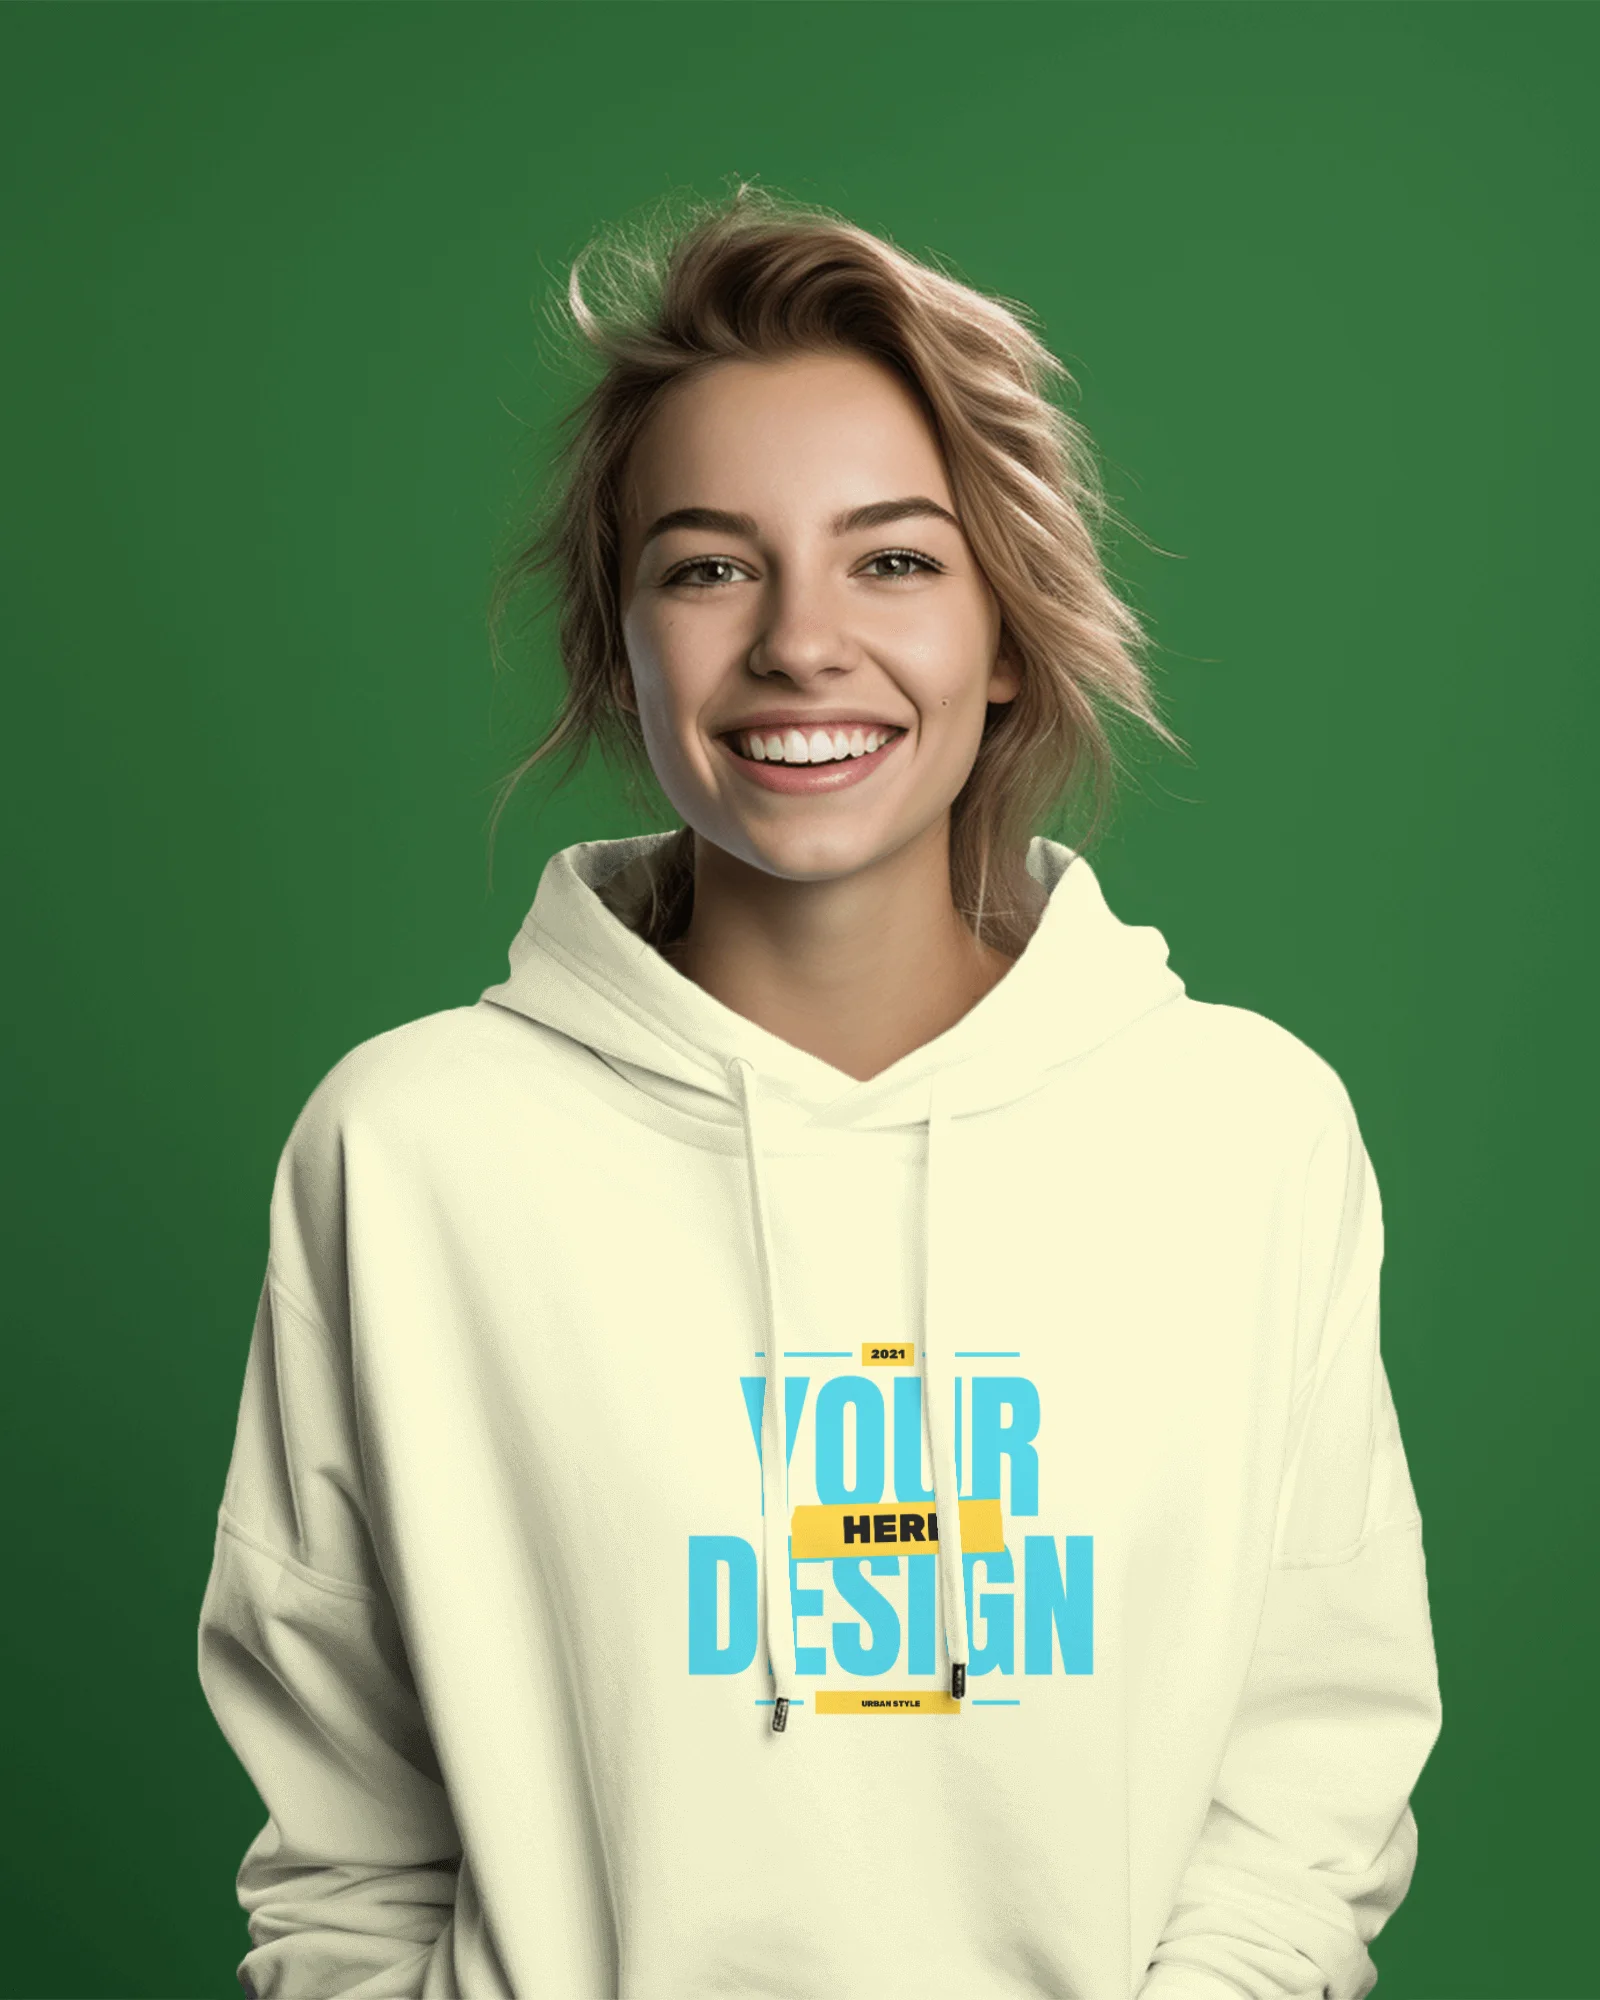 Ai Woman wearing cream hoodie in front of green background